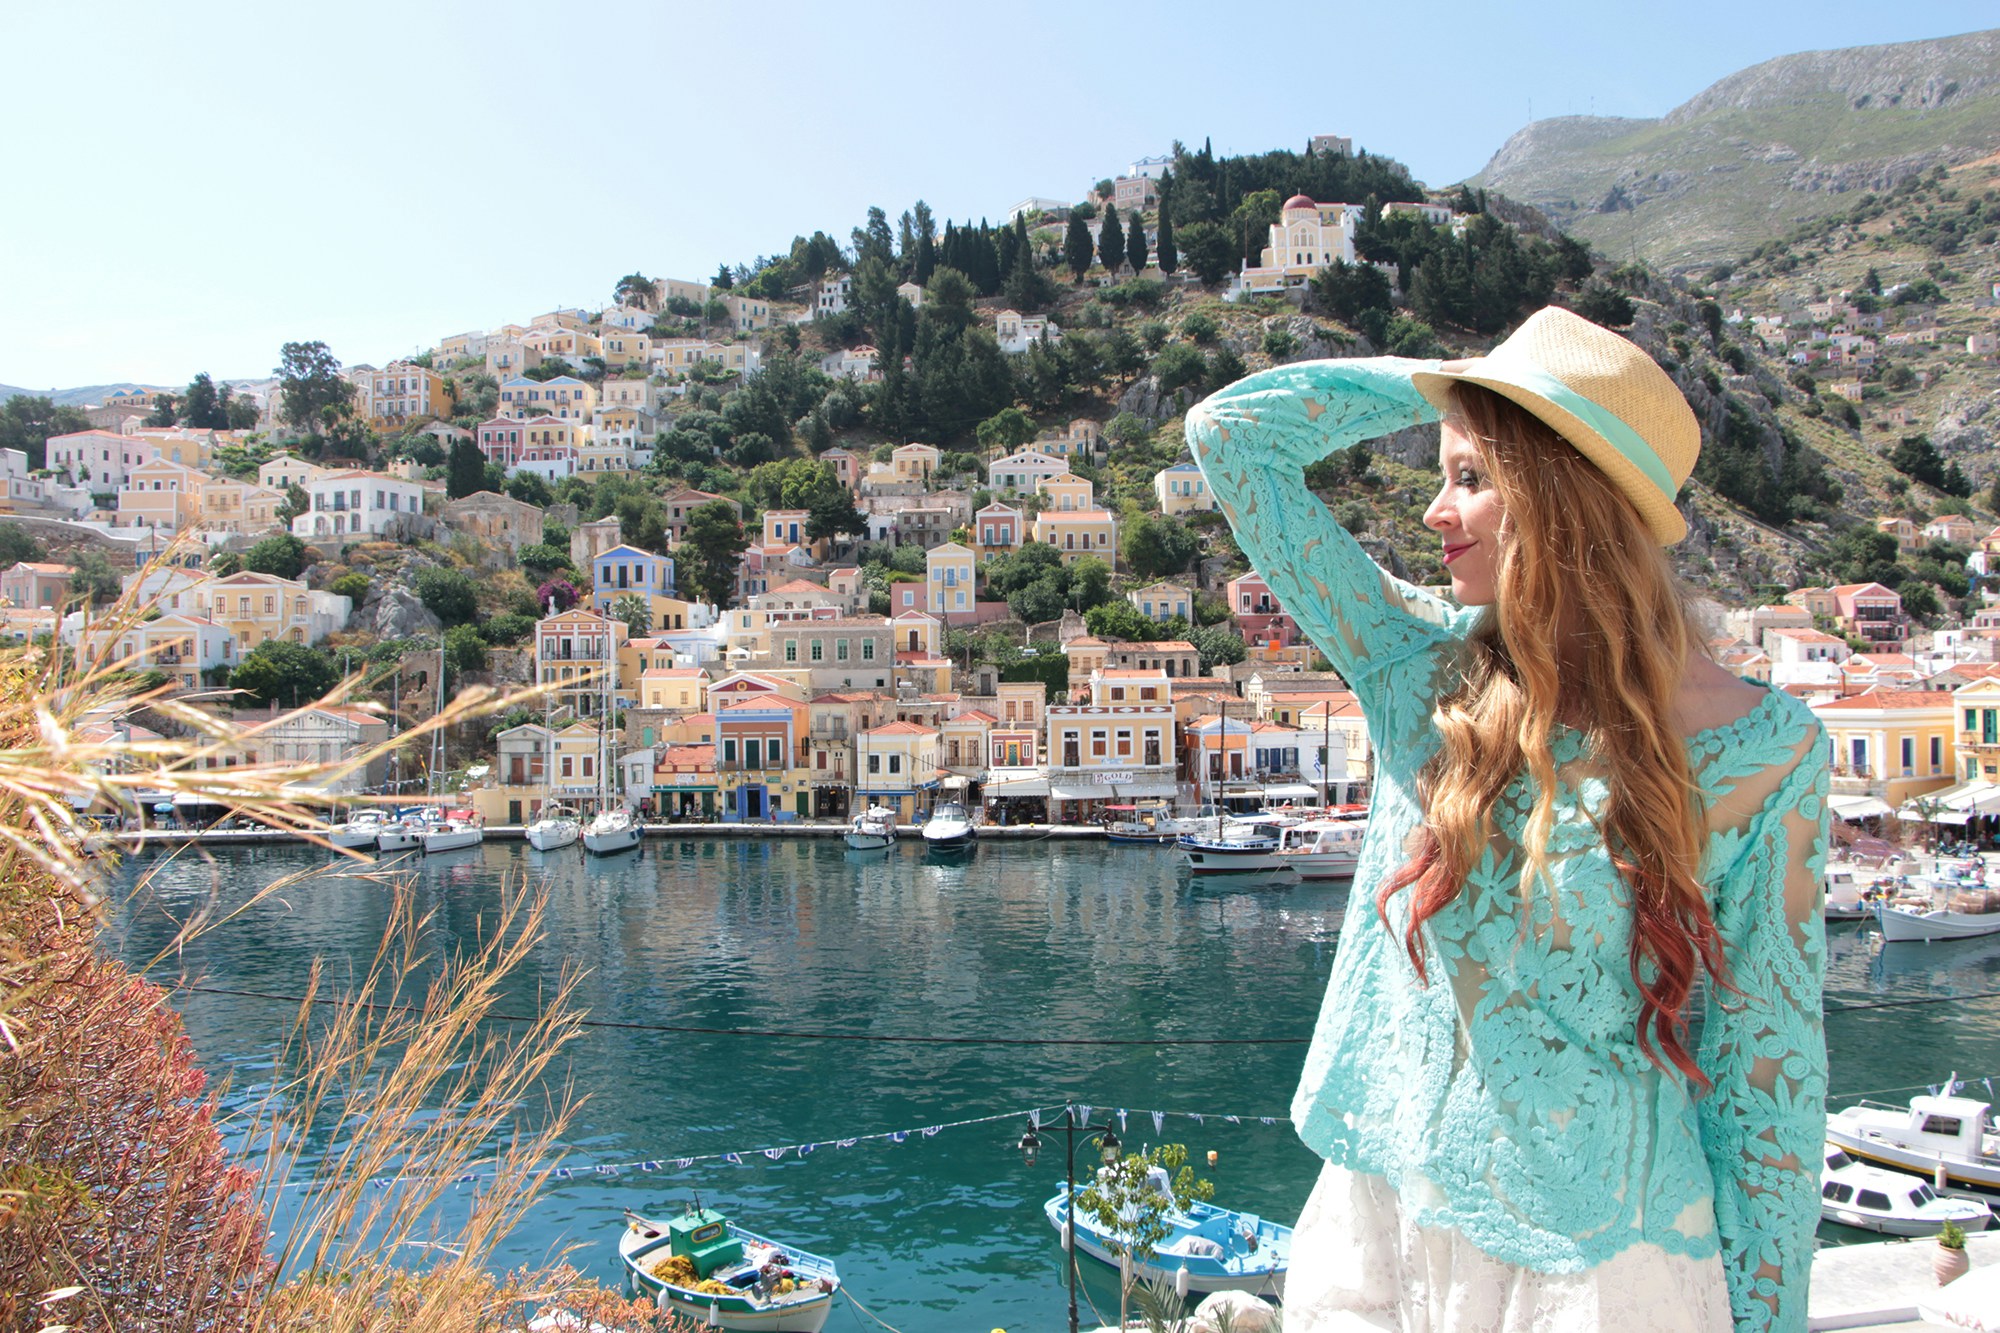 symi greece outfit mint fedora and crochet lace top